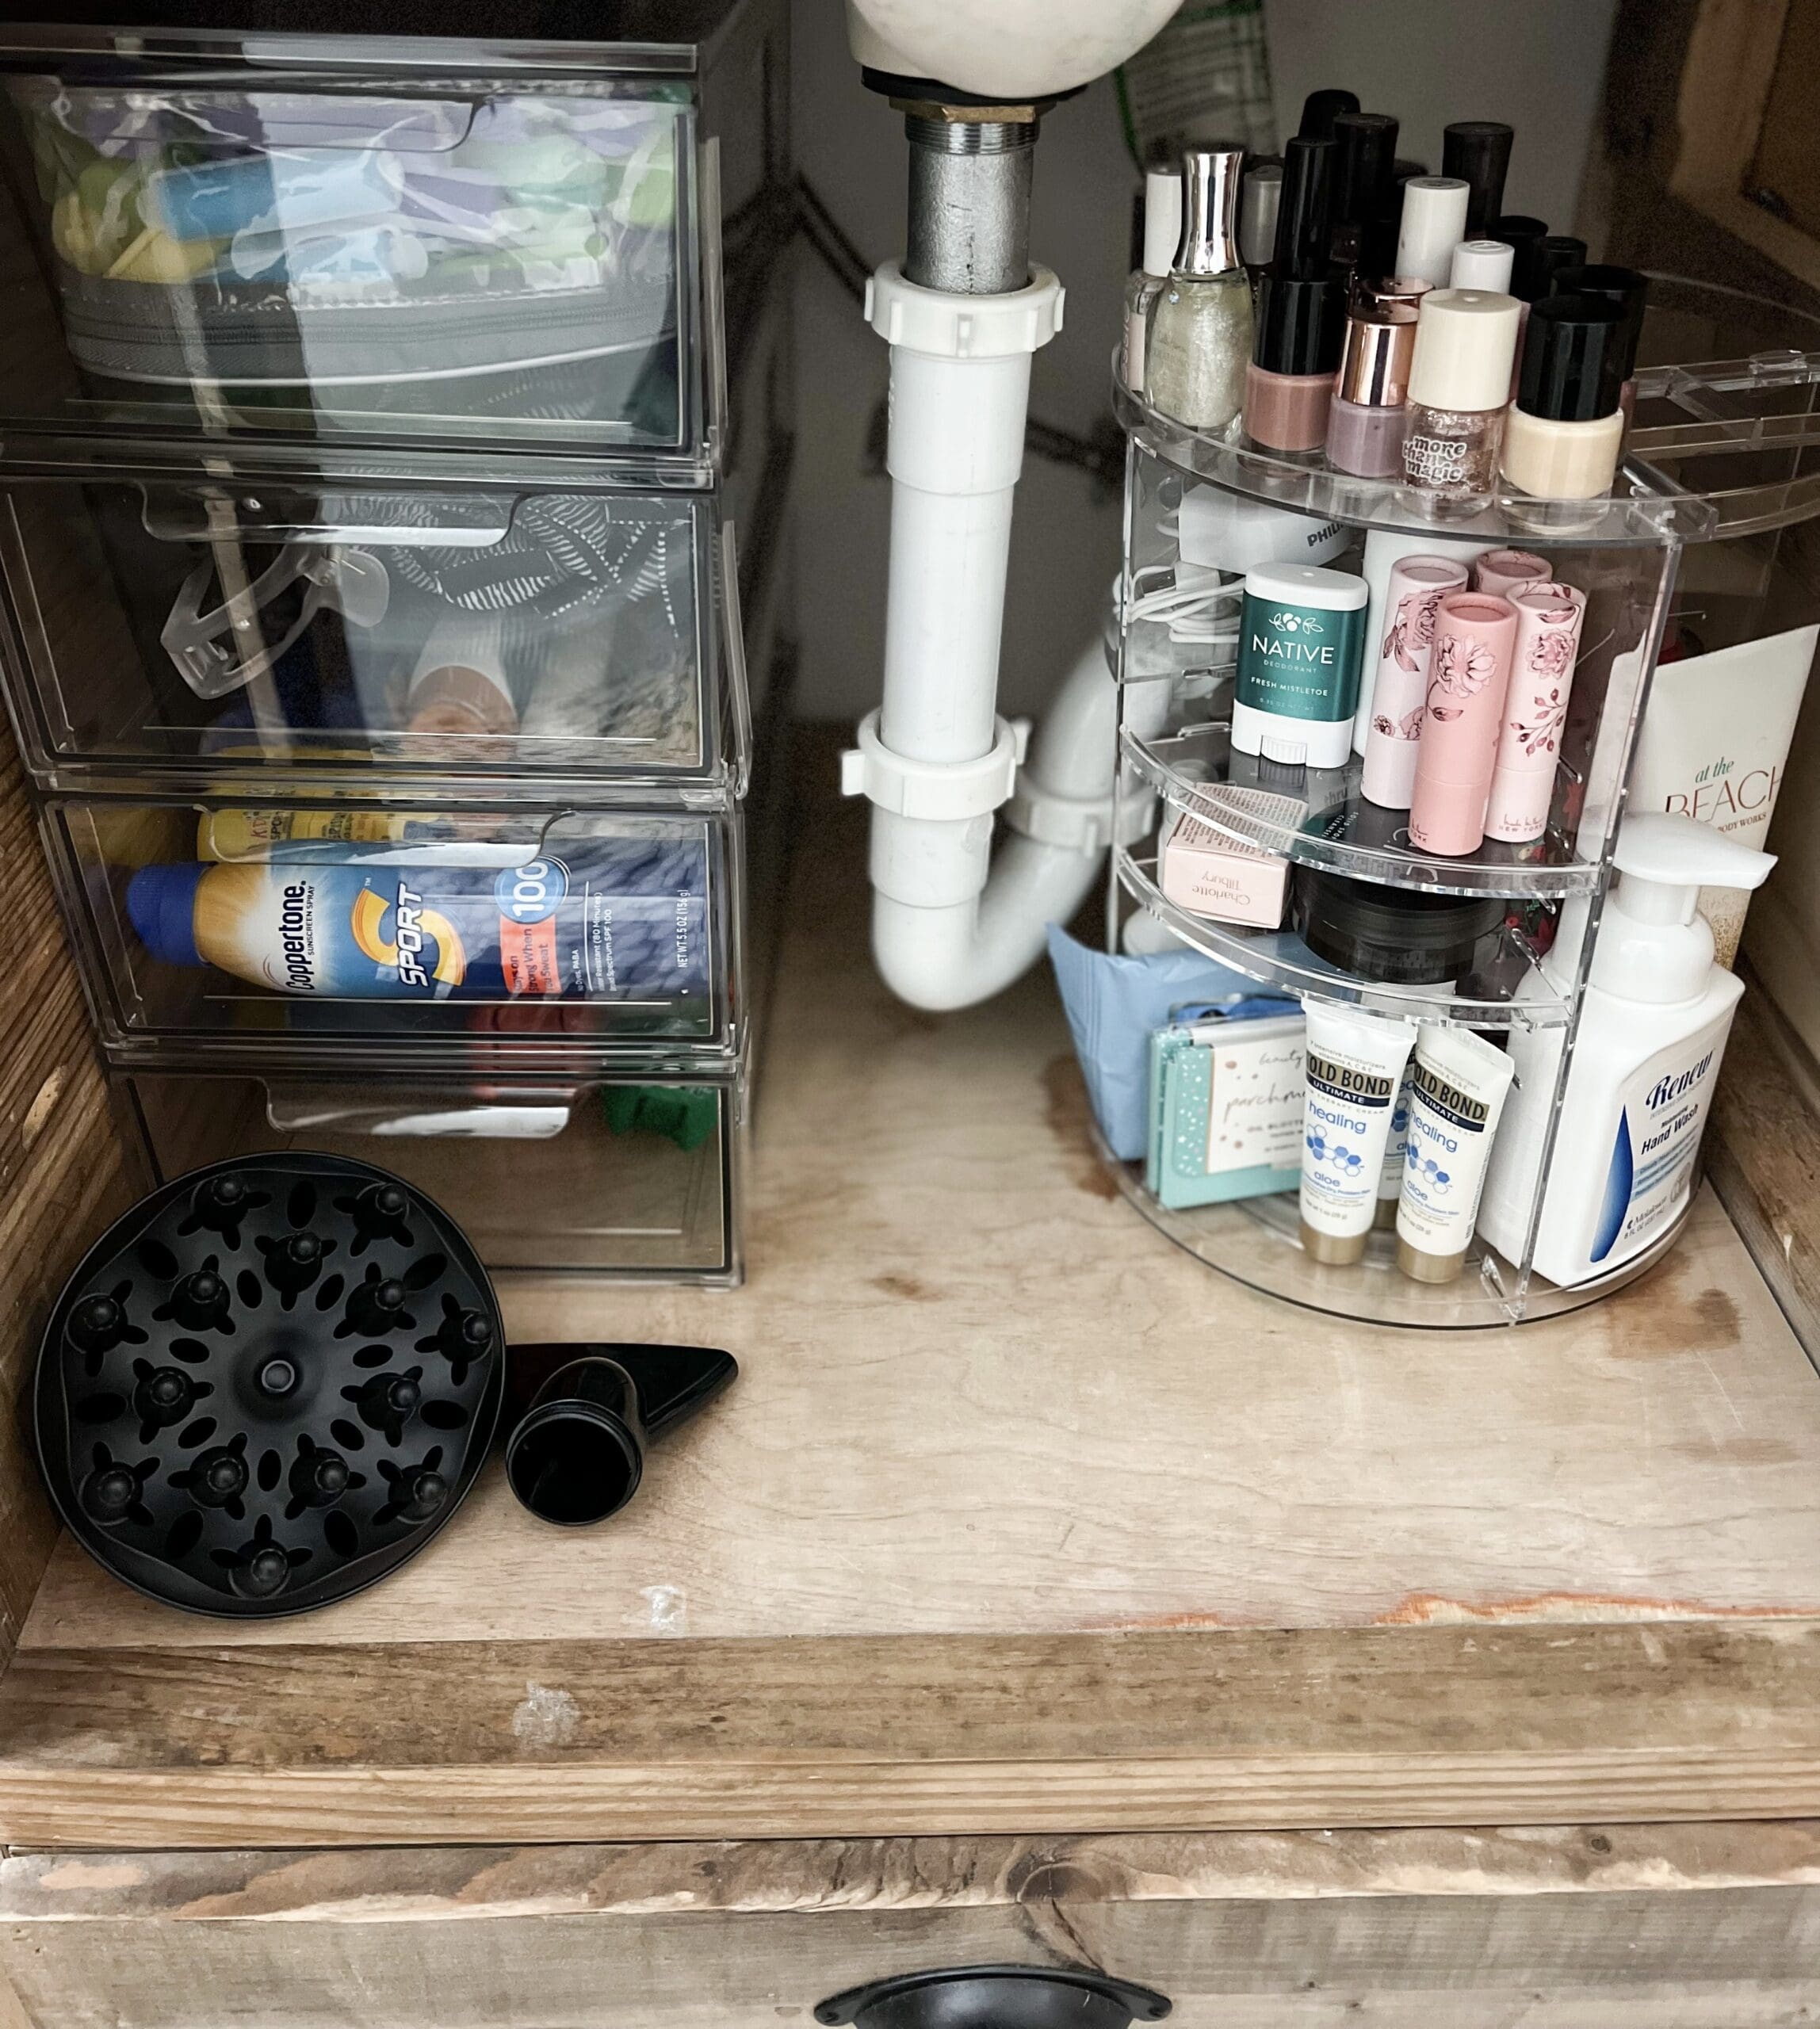 bathroom cabinet organized with acrylic drawers to hold hair supplies and a turning organizer for makeup and other beauty products